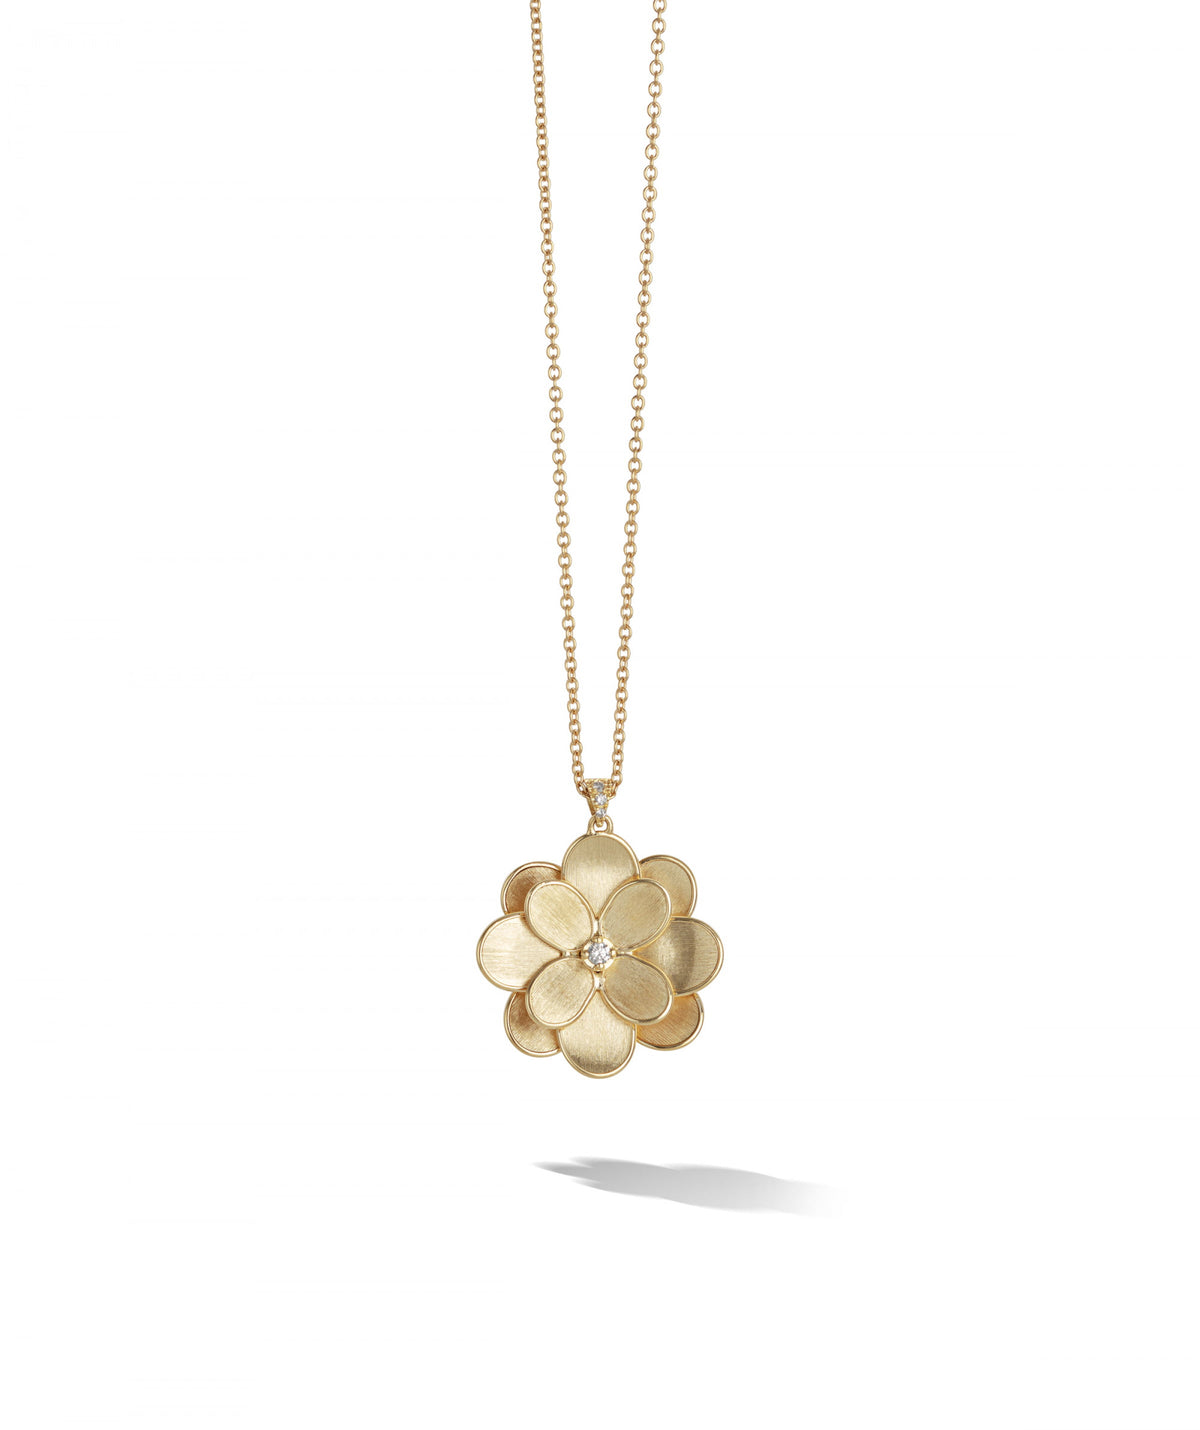 Petali Necklace in 18k Yellow Gold with Diamonds Long - Orsini Jewellers NZ